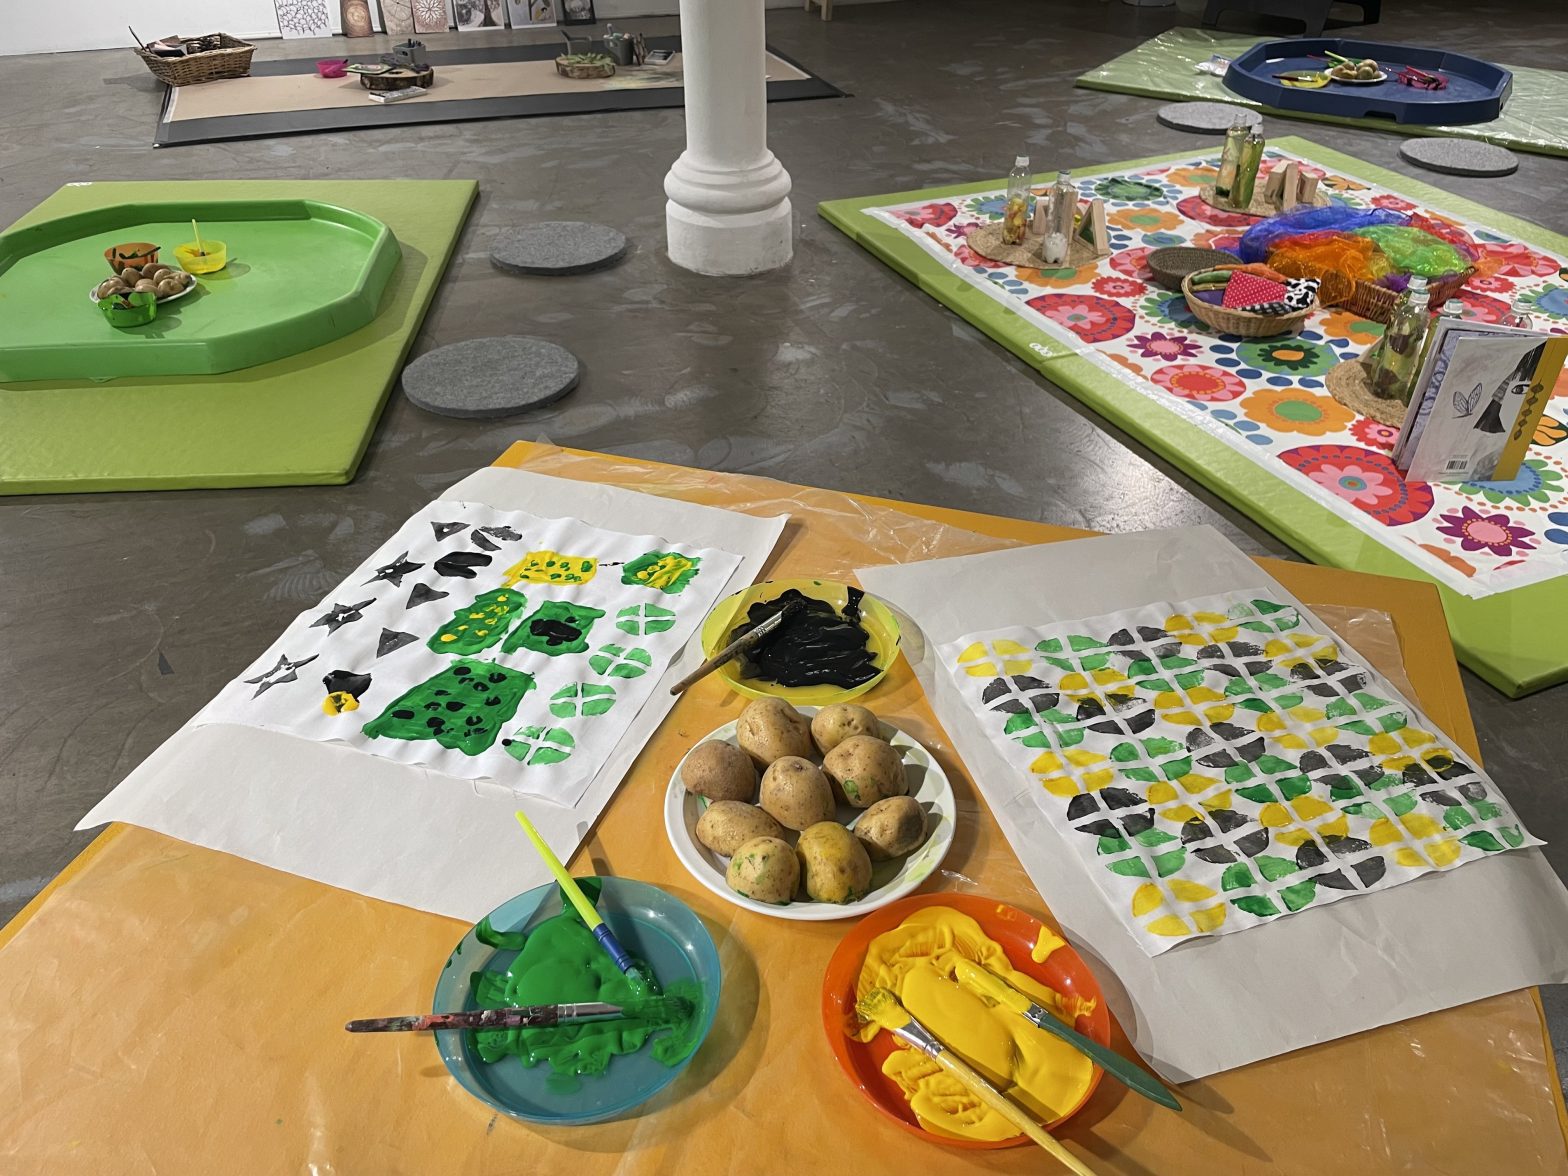 Brightly coloured potato prints laid out on the floor next to three bowls filled with paint and potatoes.